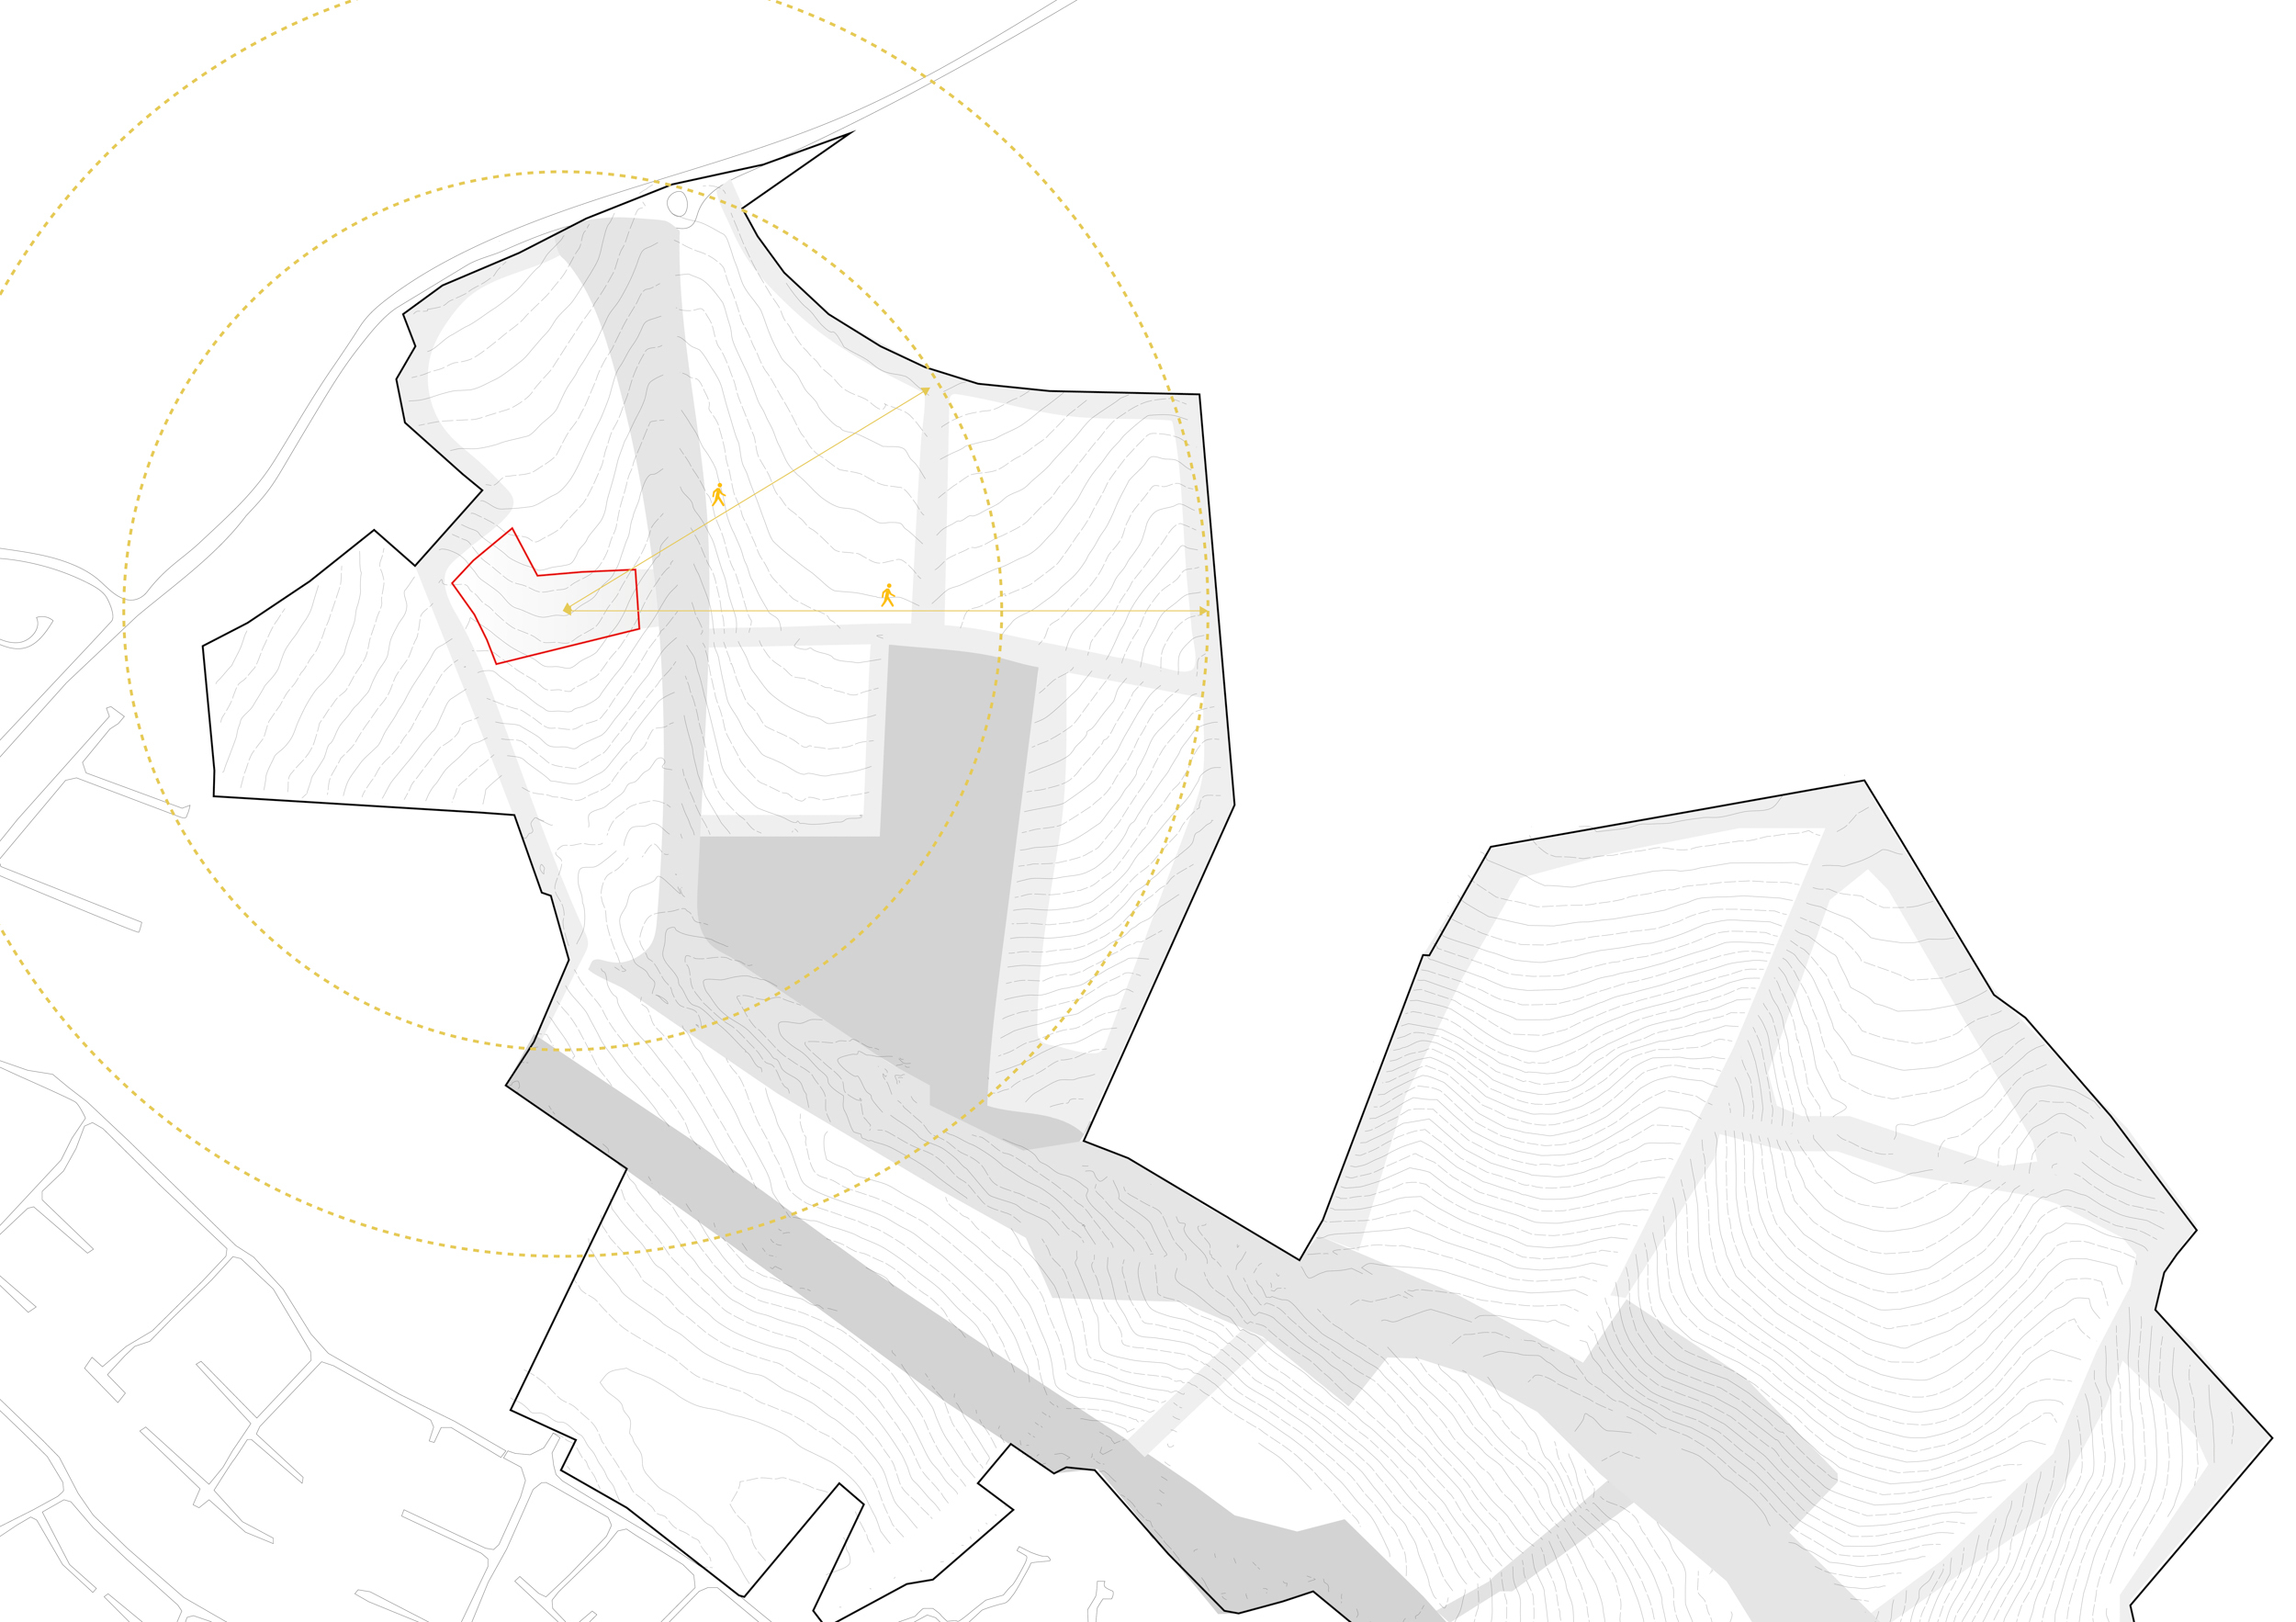 Site strategy diagram showing 5 minute and 7.5 minute walking distance from site  | Cambridge architects CDC Studio